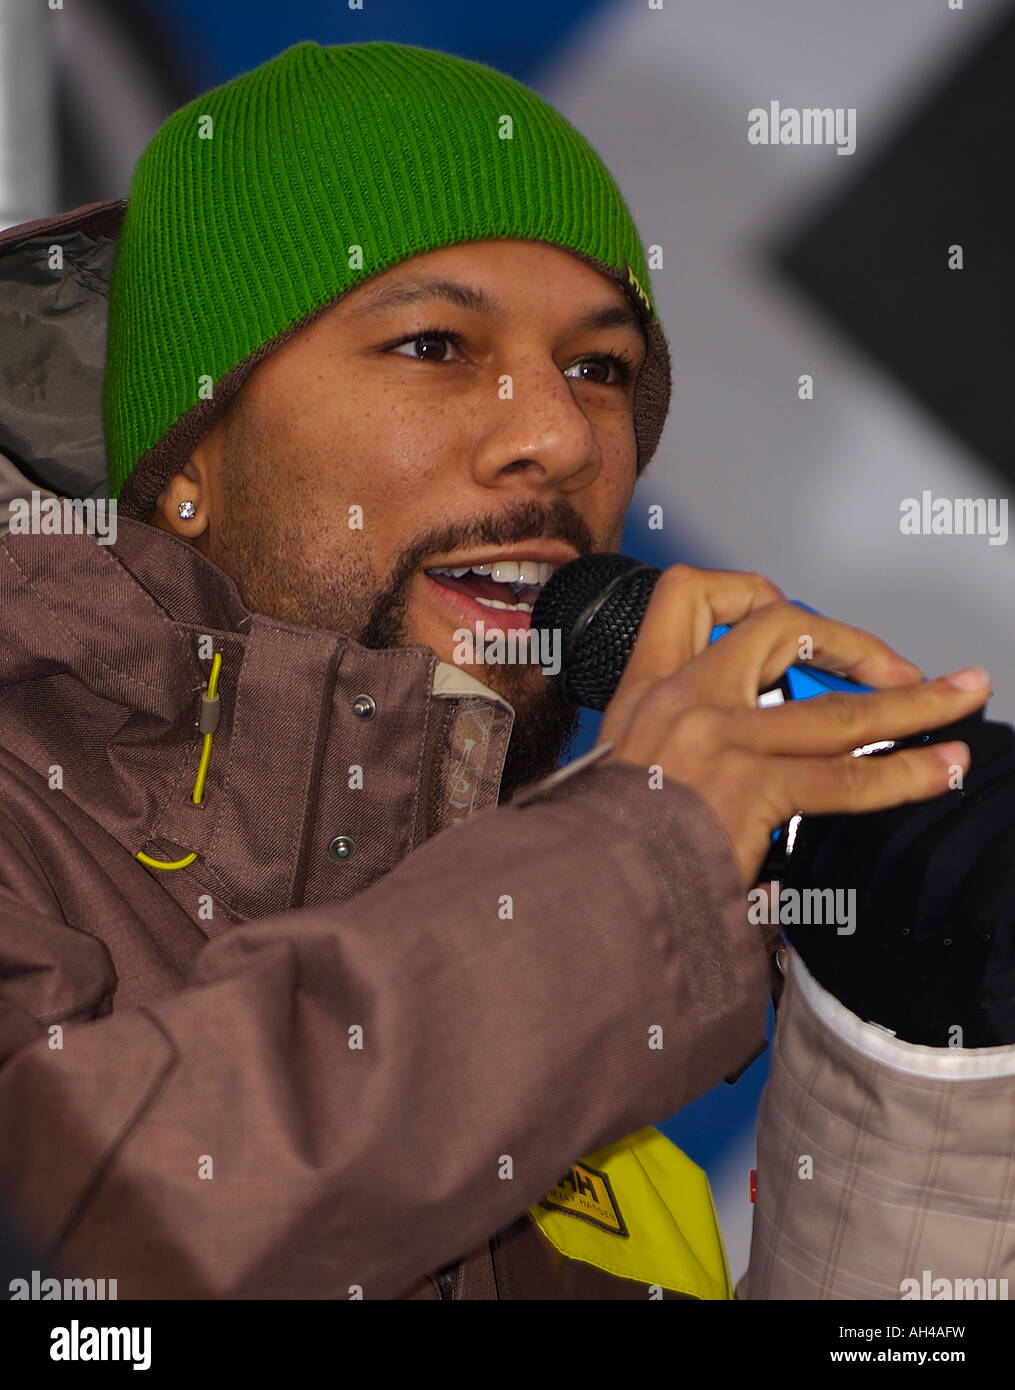 Grammy Award Winning Rapper Common at the 2007 ESPN Winter X Games 11 Snowboard Slopestyle Medal Ceremony at Buttermilk Mountain Stock Photo